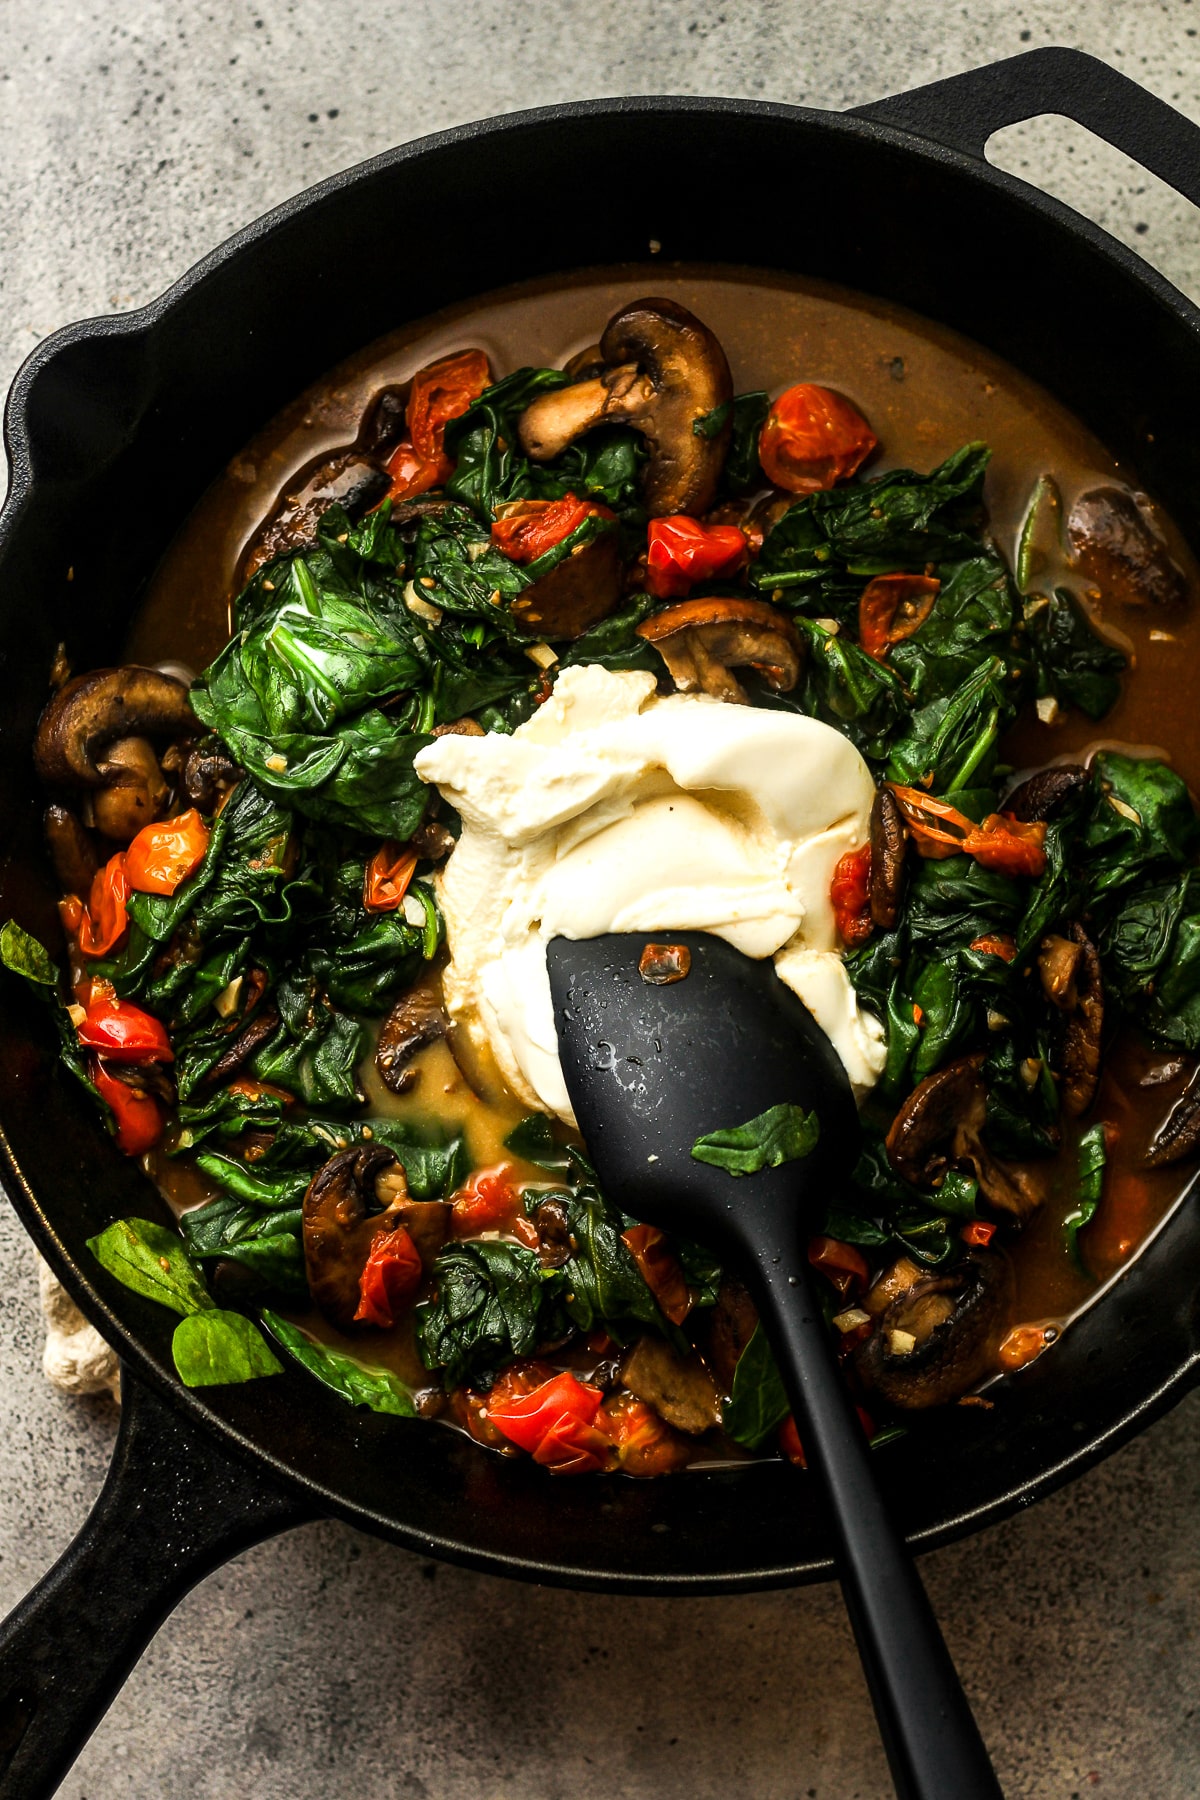 A skillet of the veggies with ricotta. cheese on top.